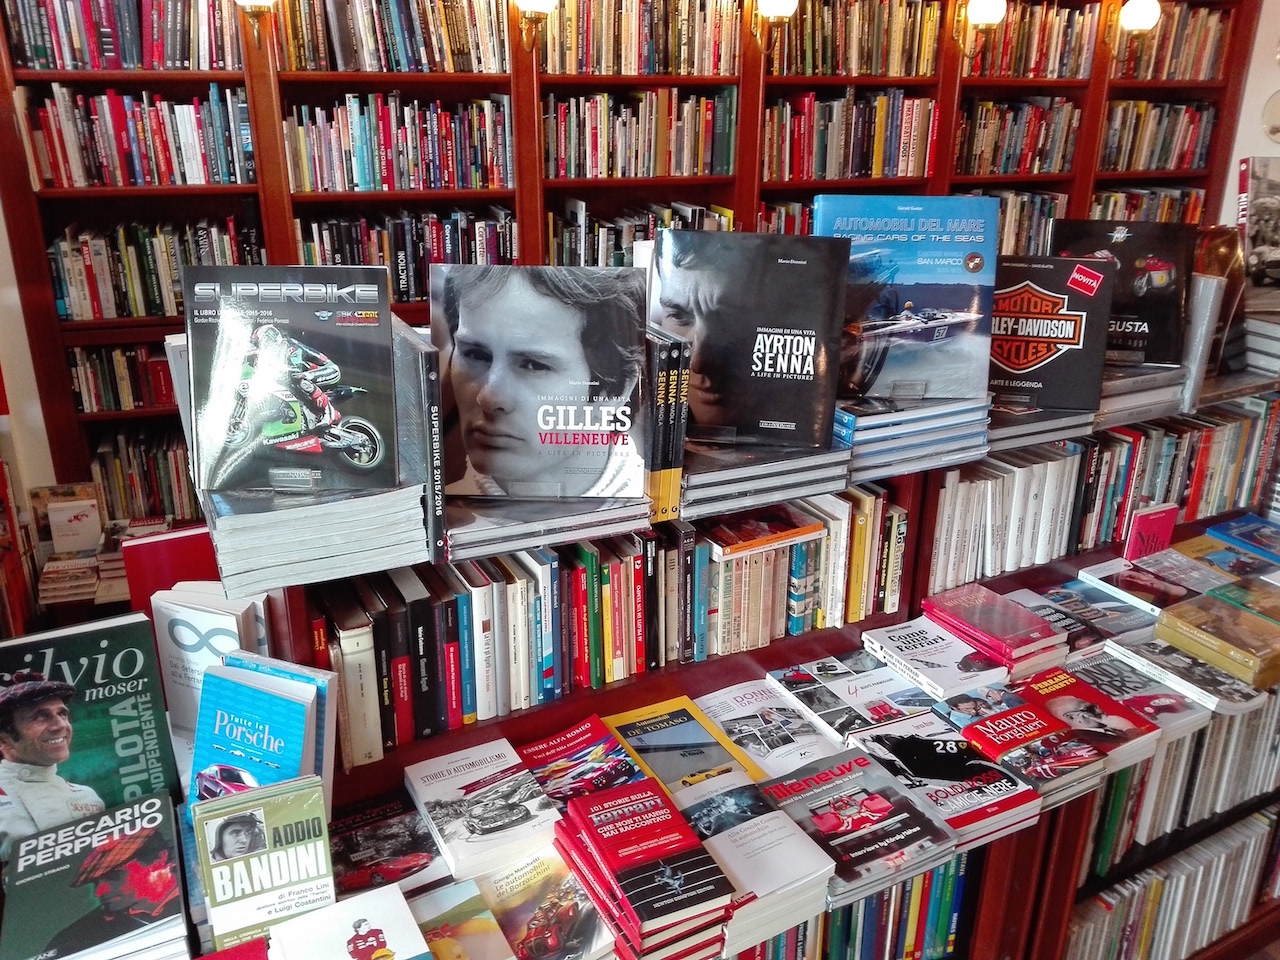 Some of the many books published by Giorgio Nada Editore